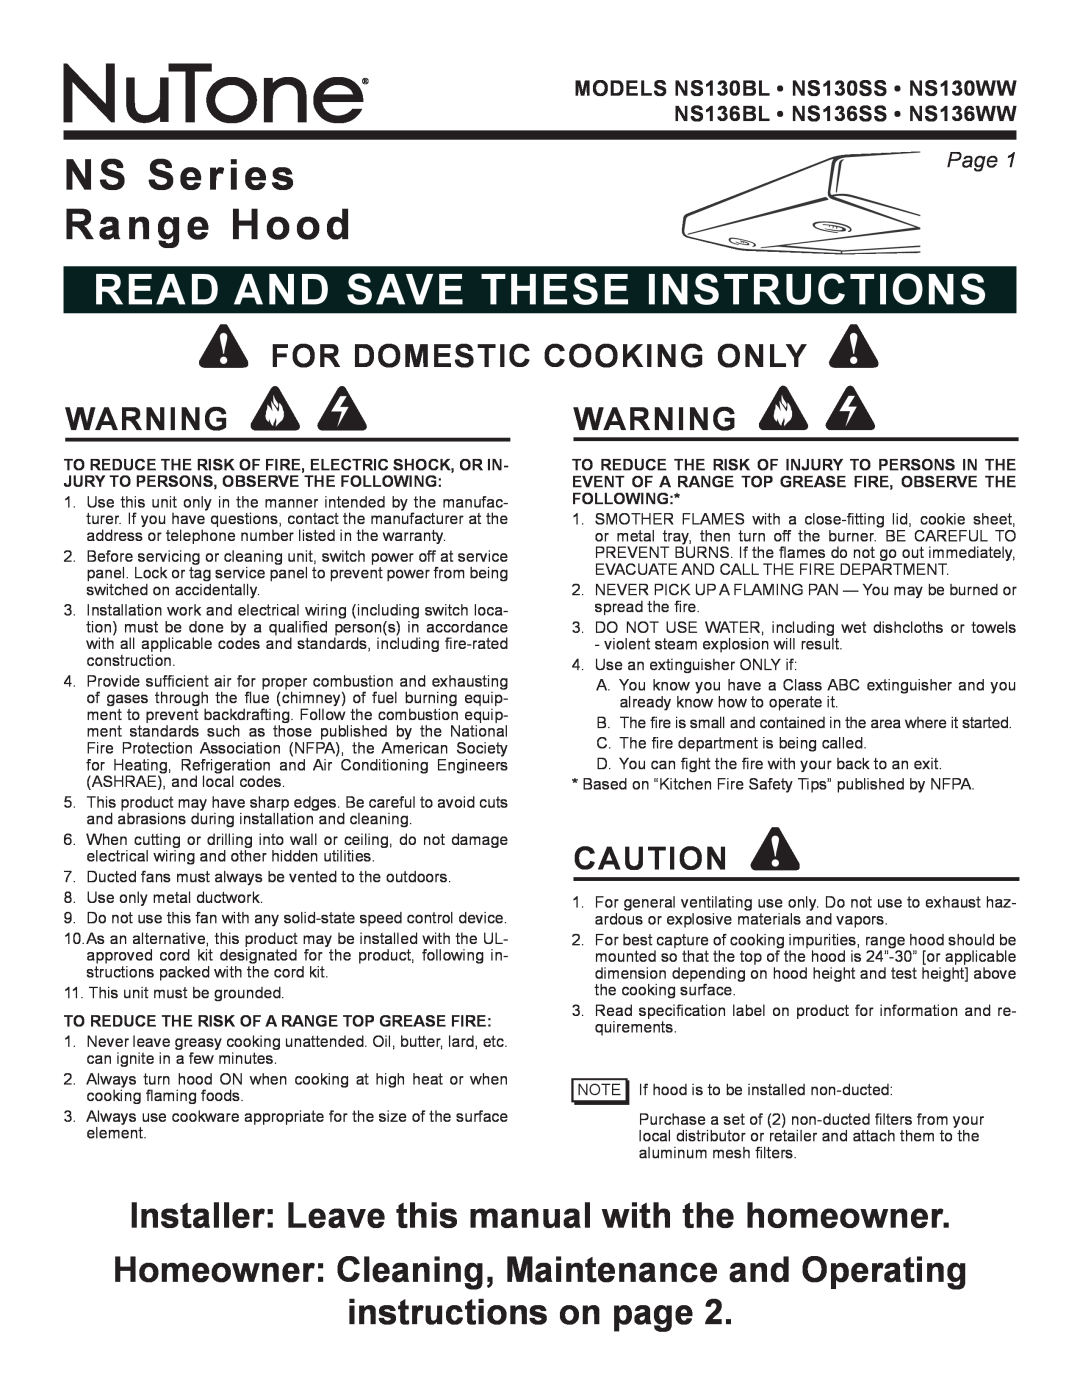 NuTone NS136BL, NS136WW warranty NS Series Range Hood, read and save these instructions, instructions on page, Page  